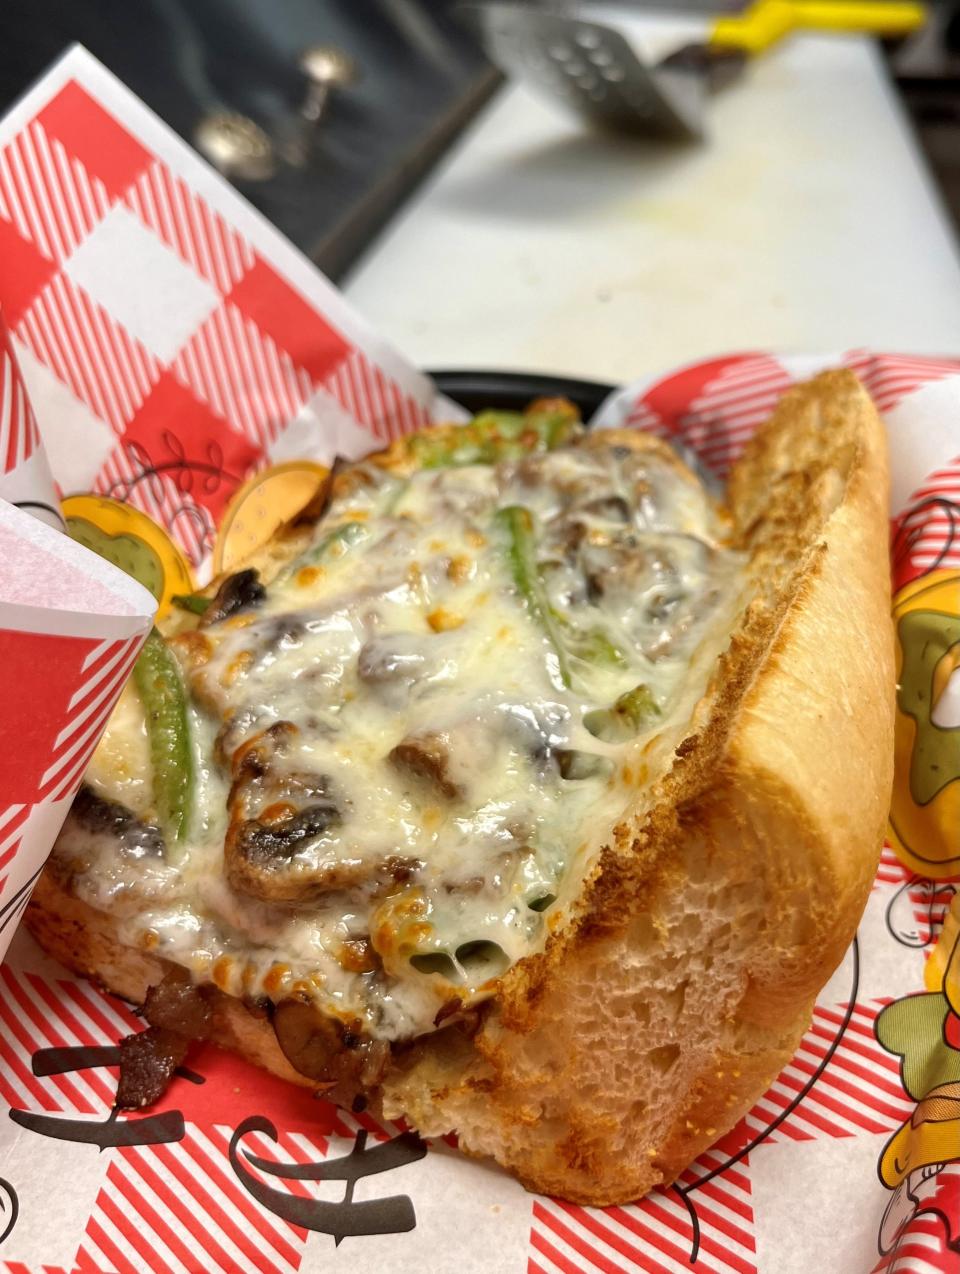 Steak & cheese is on the menu at Tony's New York Pizza & Pasta in Fort Myers.